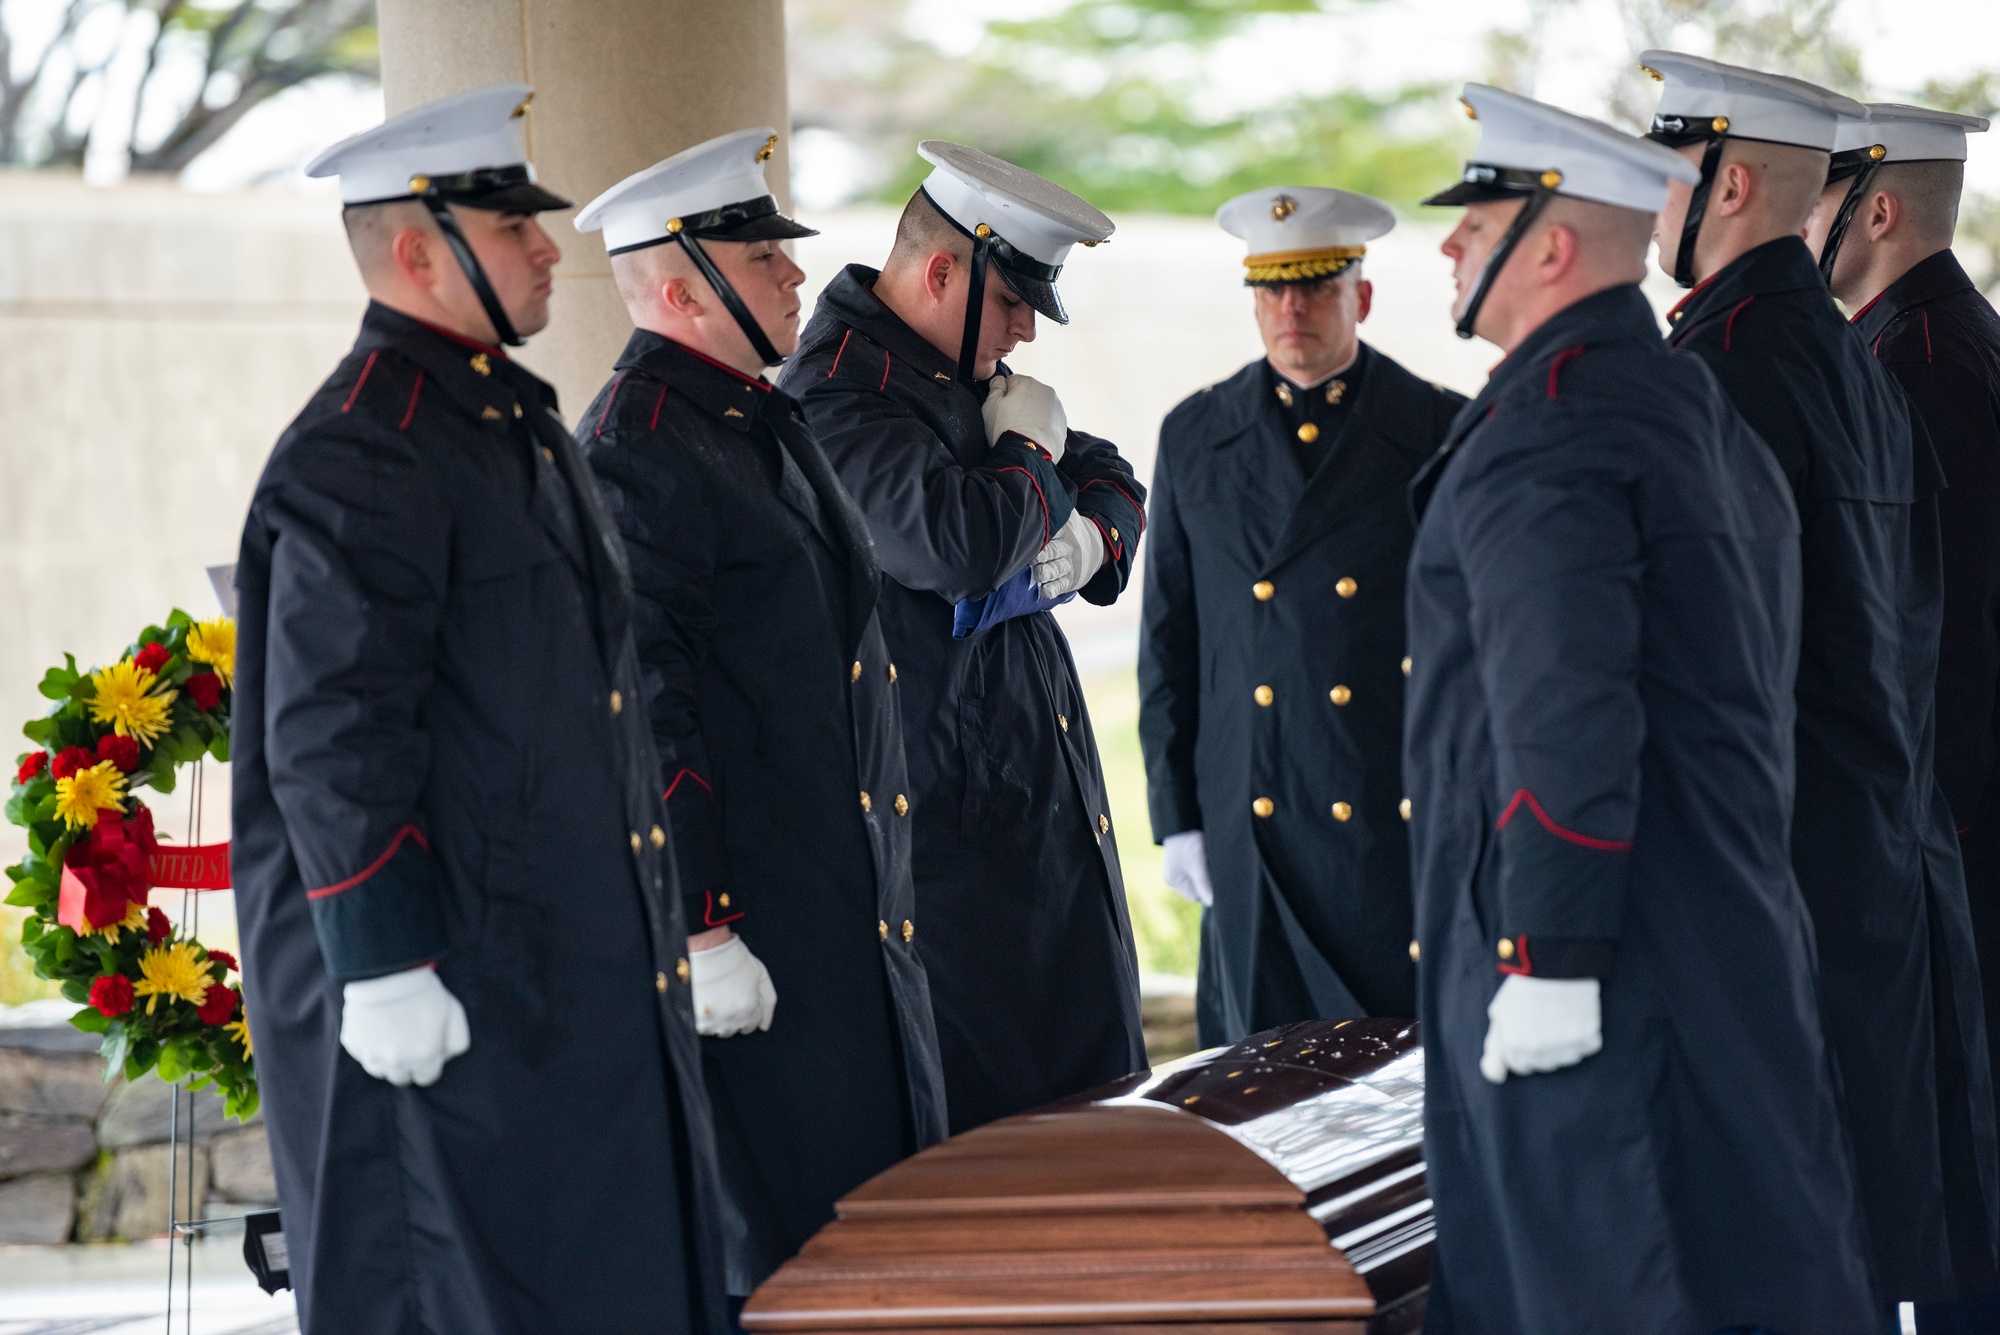 DVIDS - Images - Military Funeral Honors with Funeral Escort Were